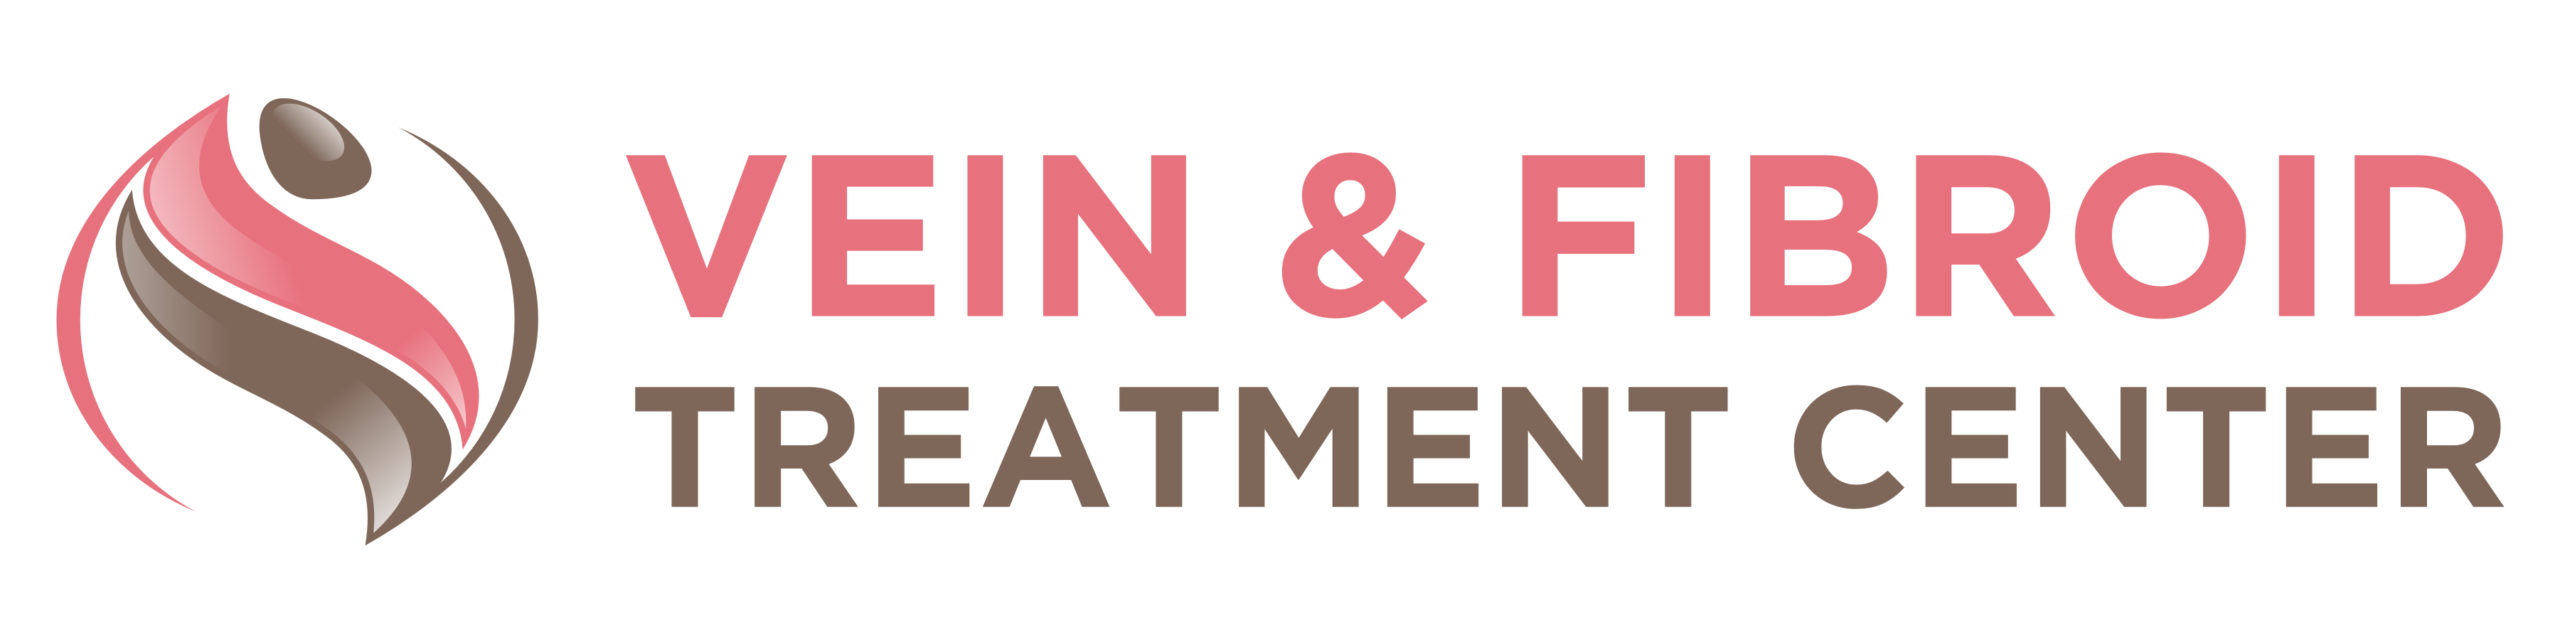 Vein and Fibroid Treatment Center